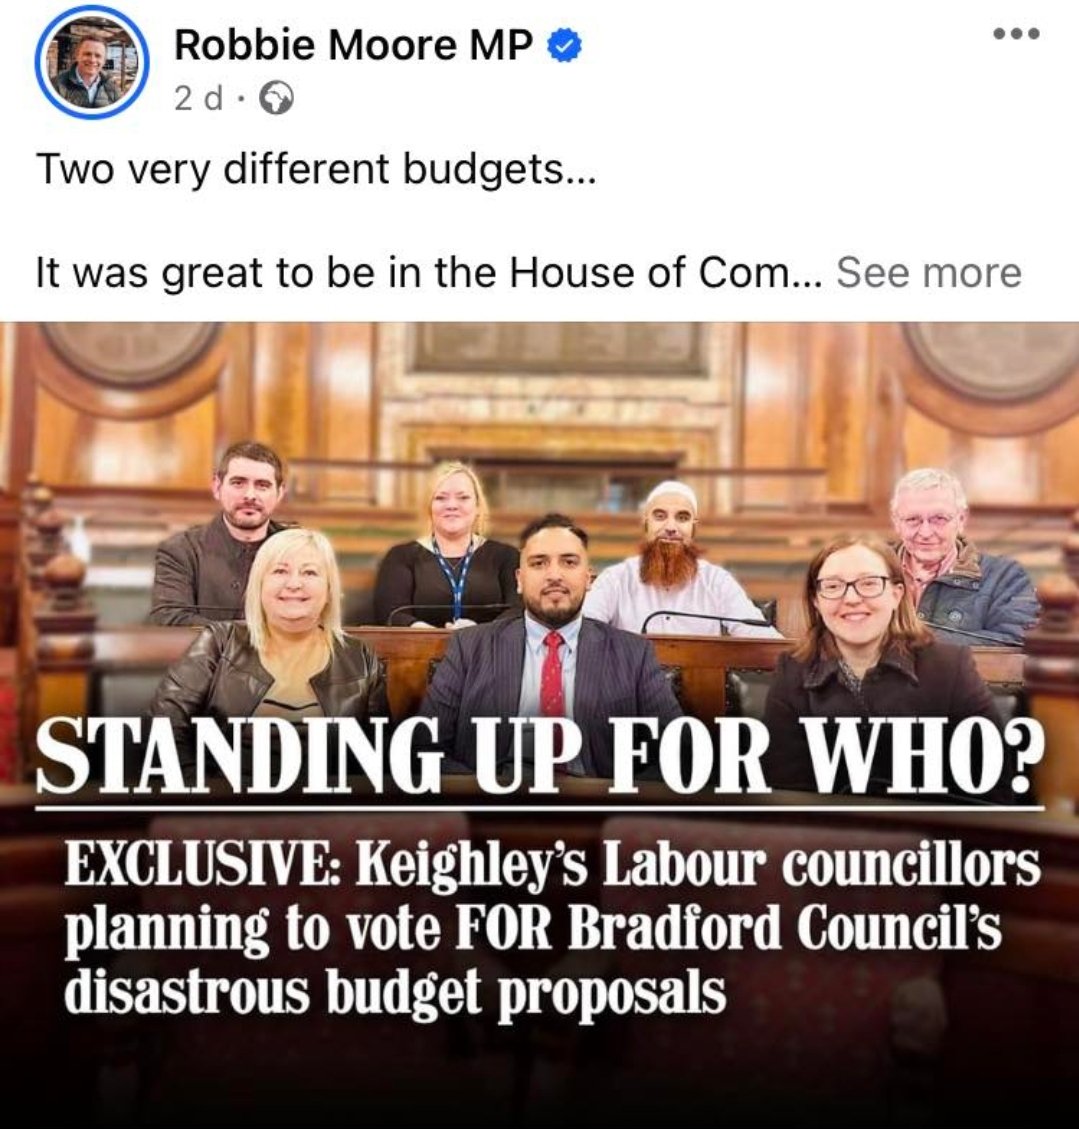 Shout out to @_RobbieMoore for considering me a councillor, not just a candidate! Your pictures does include someone who voted against the budget too - so you may wish to fact check in future.